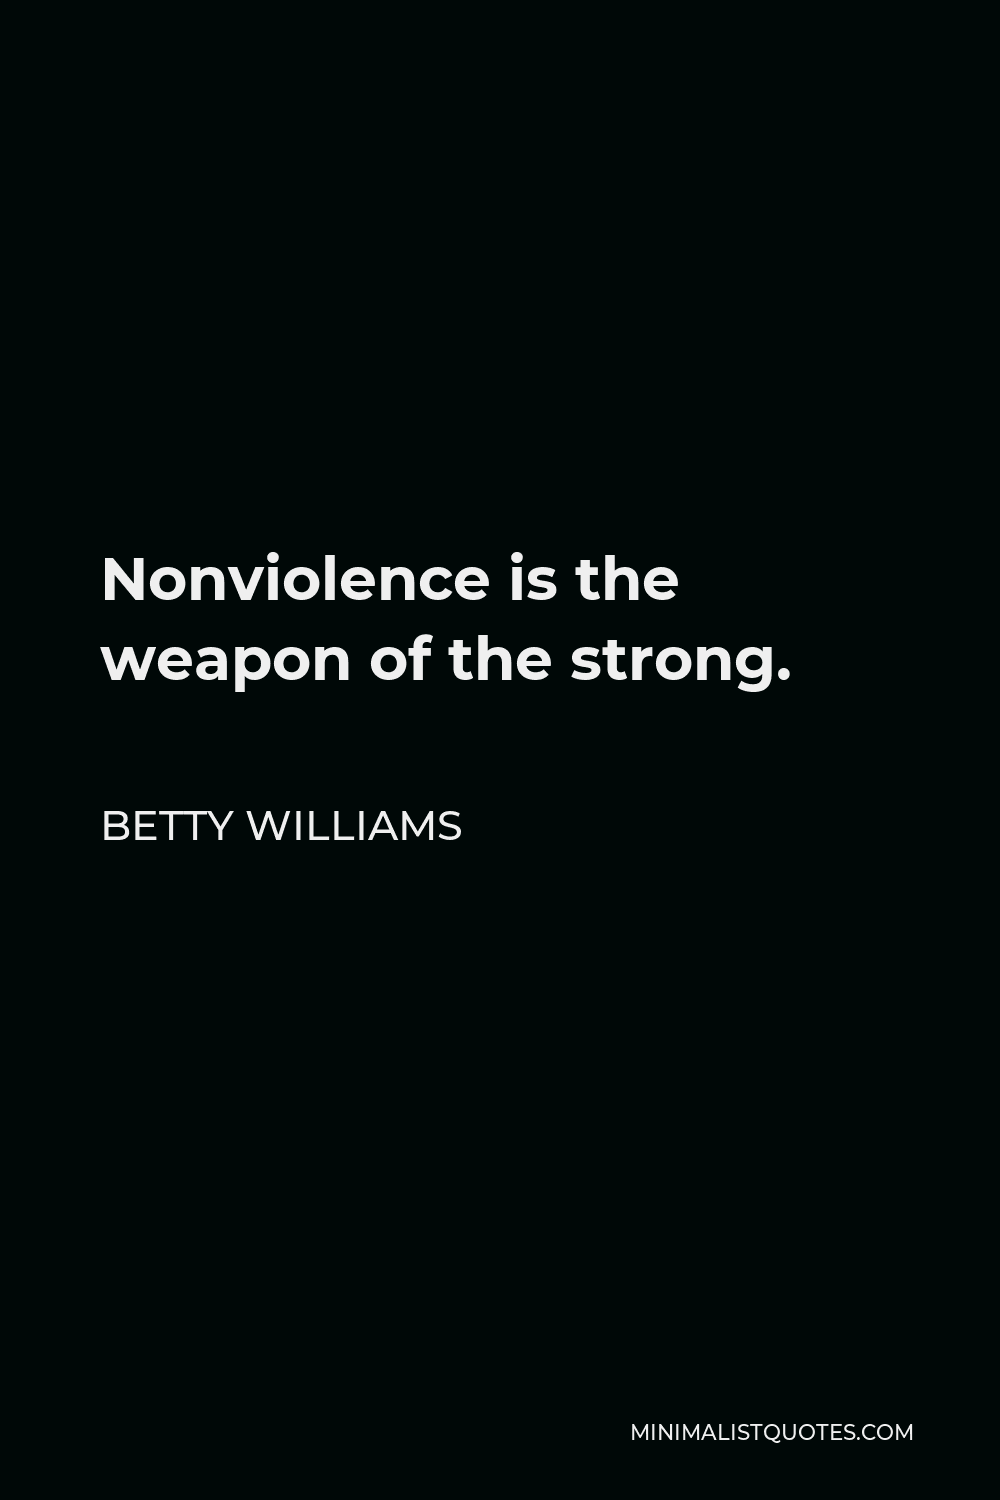 Betty Williams Quote - Nonviolence is the weapon of the strong.